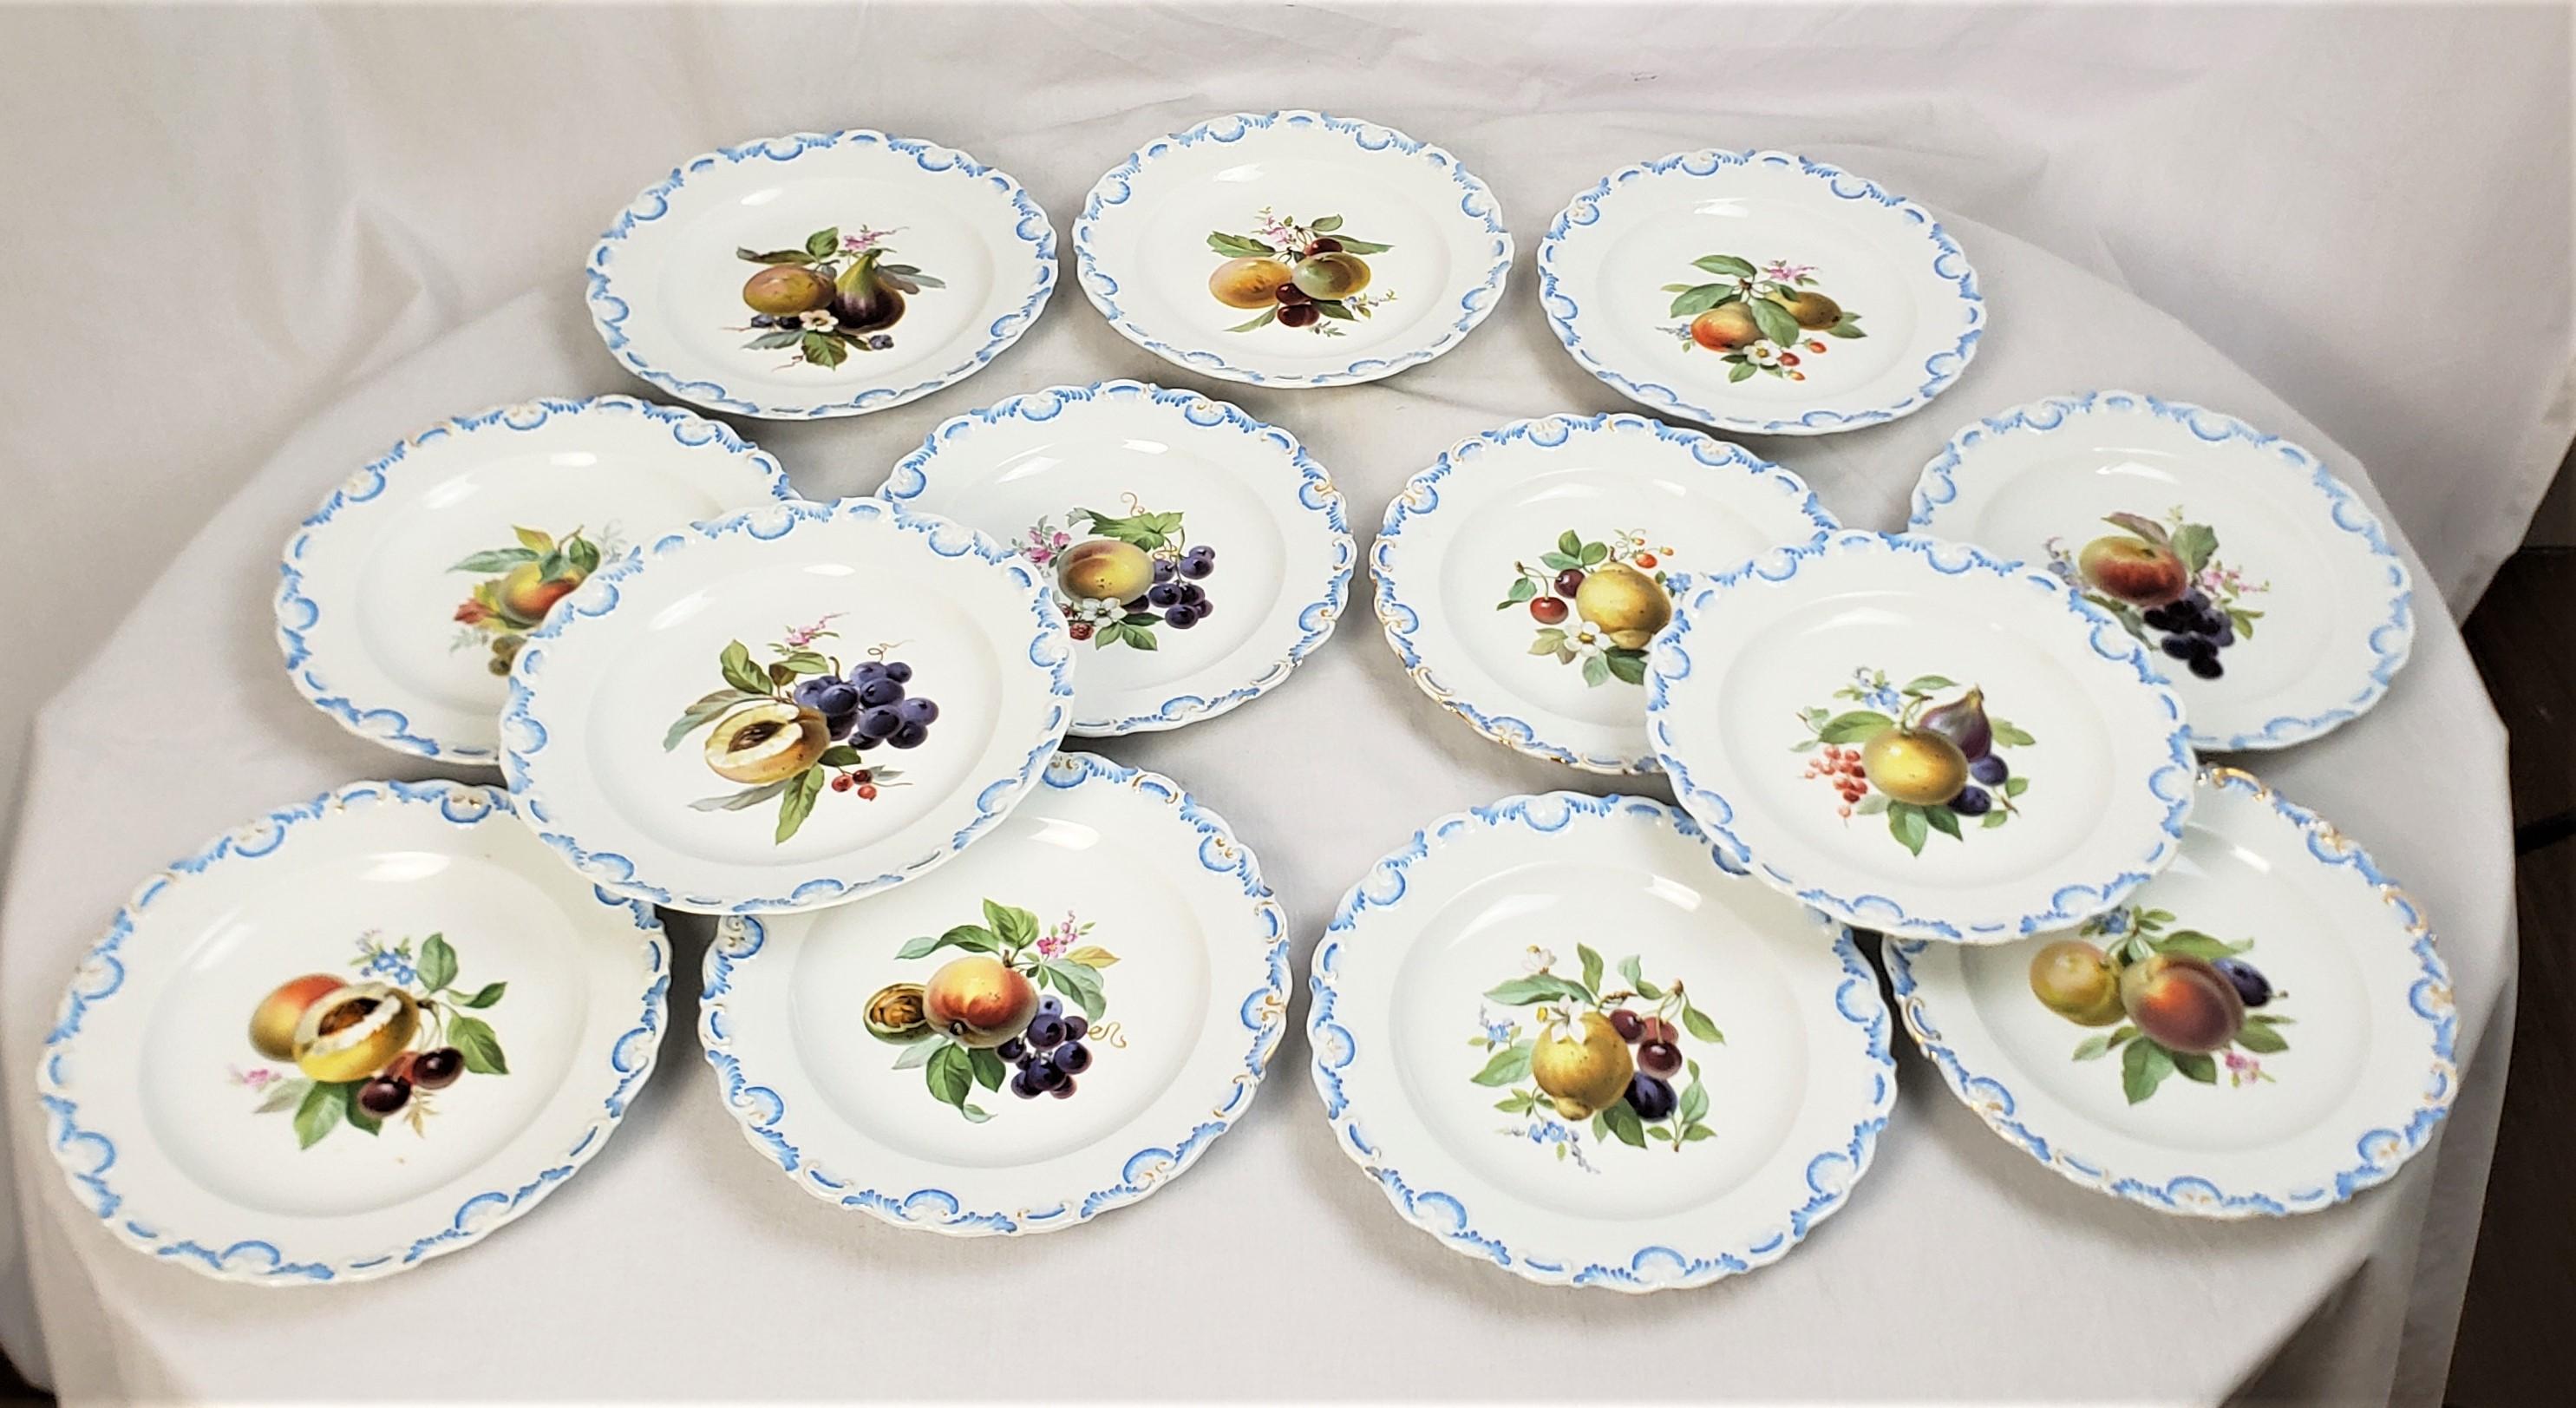 This set of antique desert or side plates was made by the renowned Meissen factory of Germany in approximately 1880 in a period Victorian style. The plates are composed of porcelain with a raised border with light blue and gilt accents and each